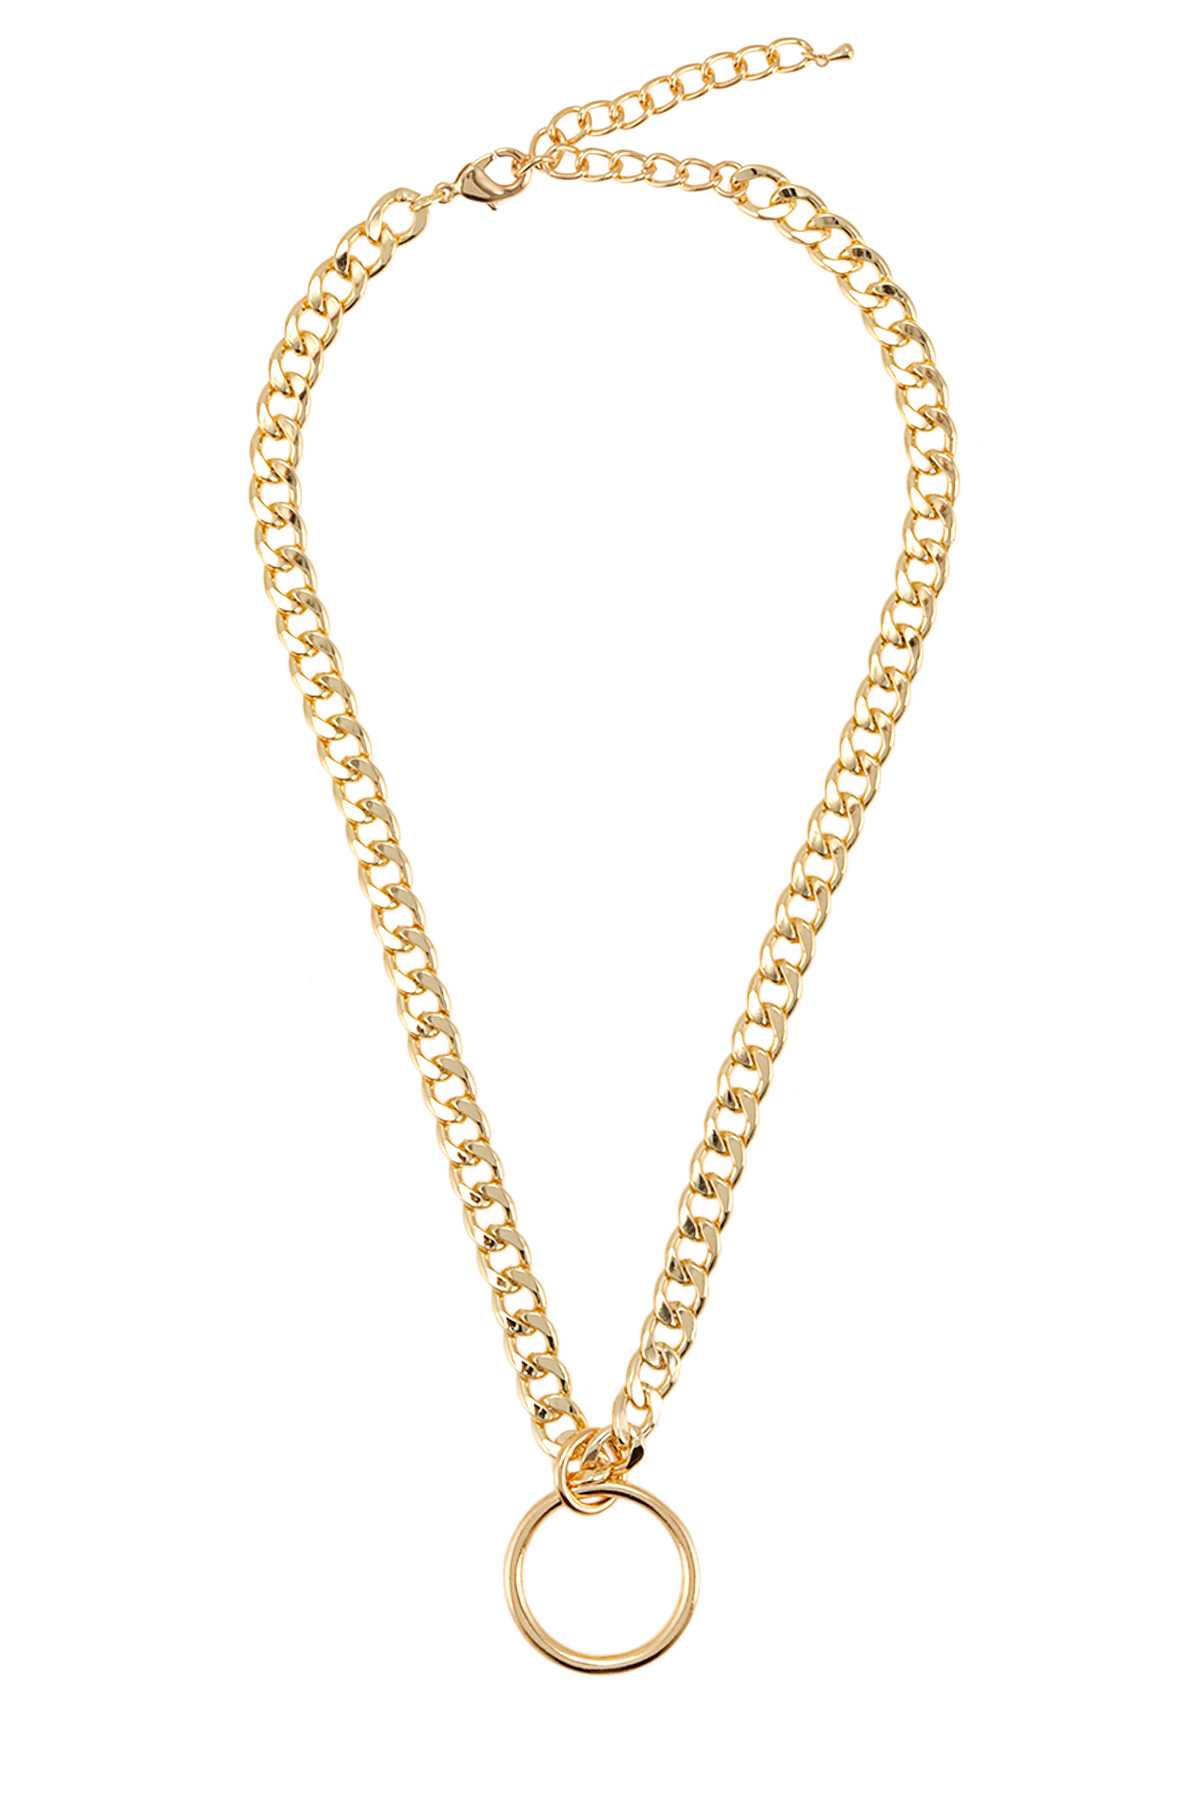 Cuban Chain with Large Metal Ring Necklace